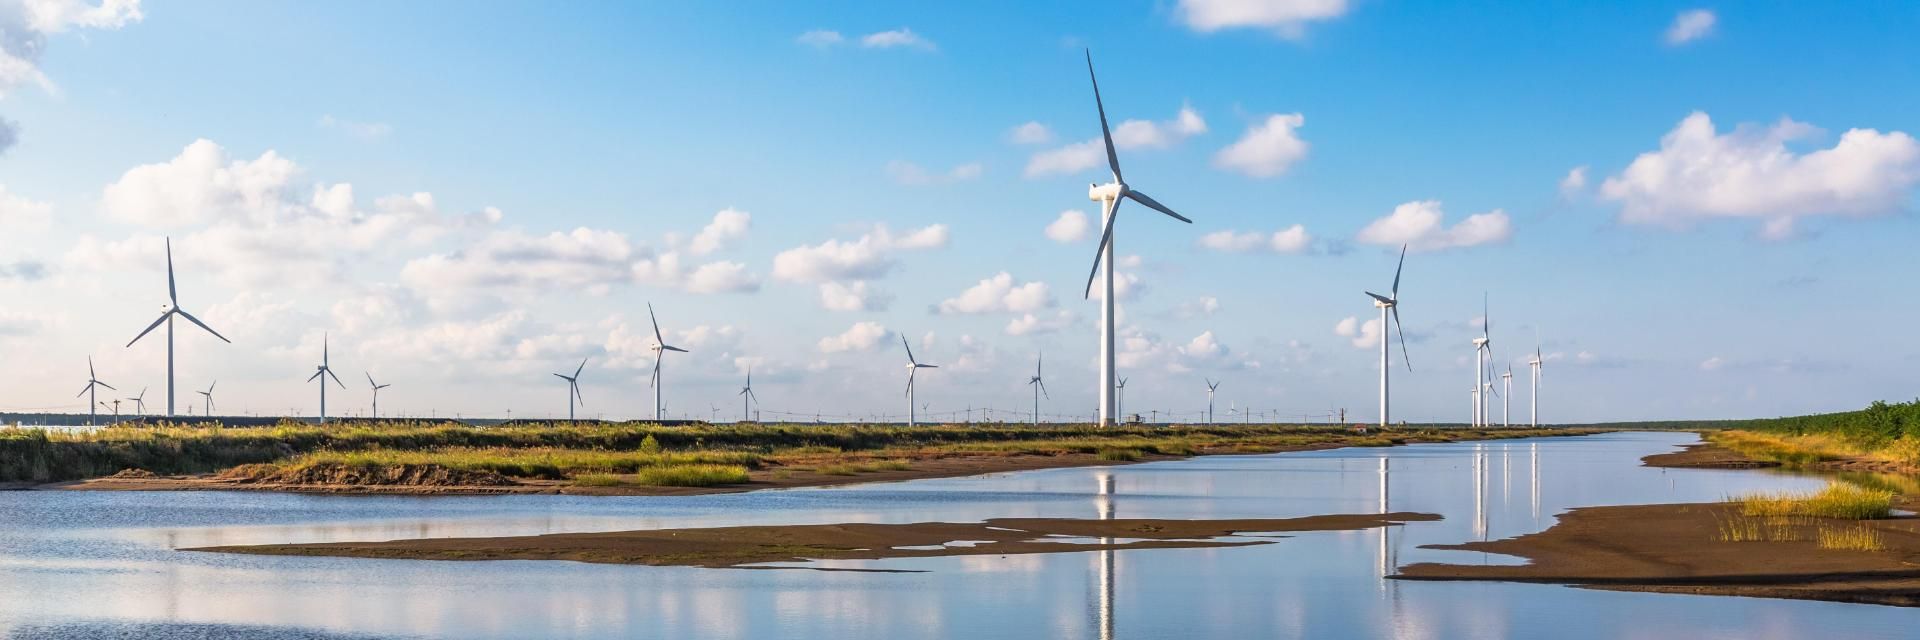 Wind turbines against a blue sky reflected in ground water